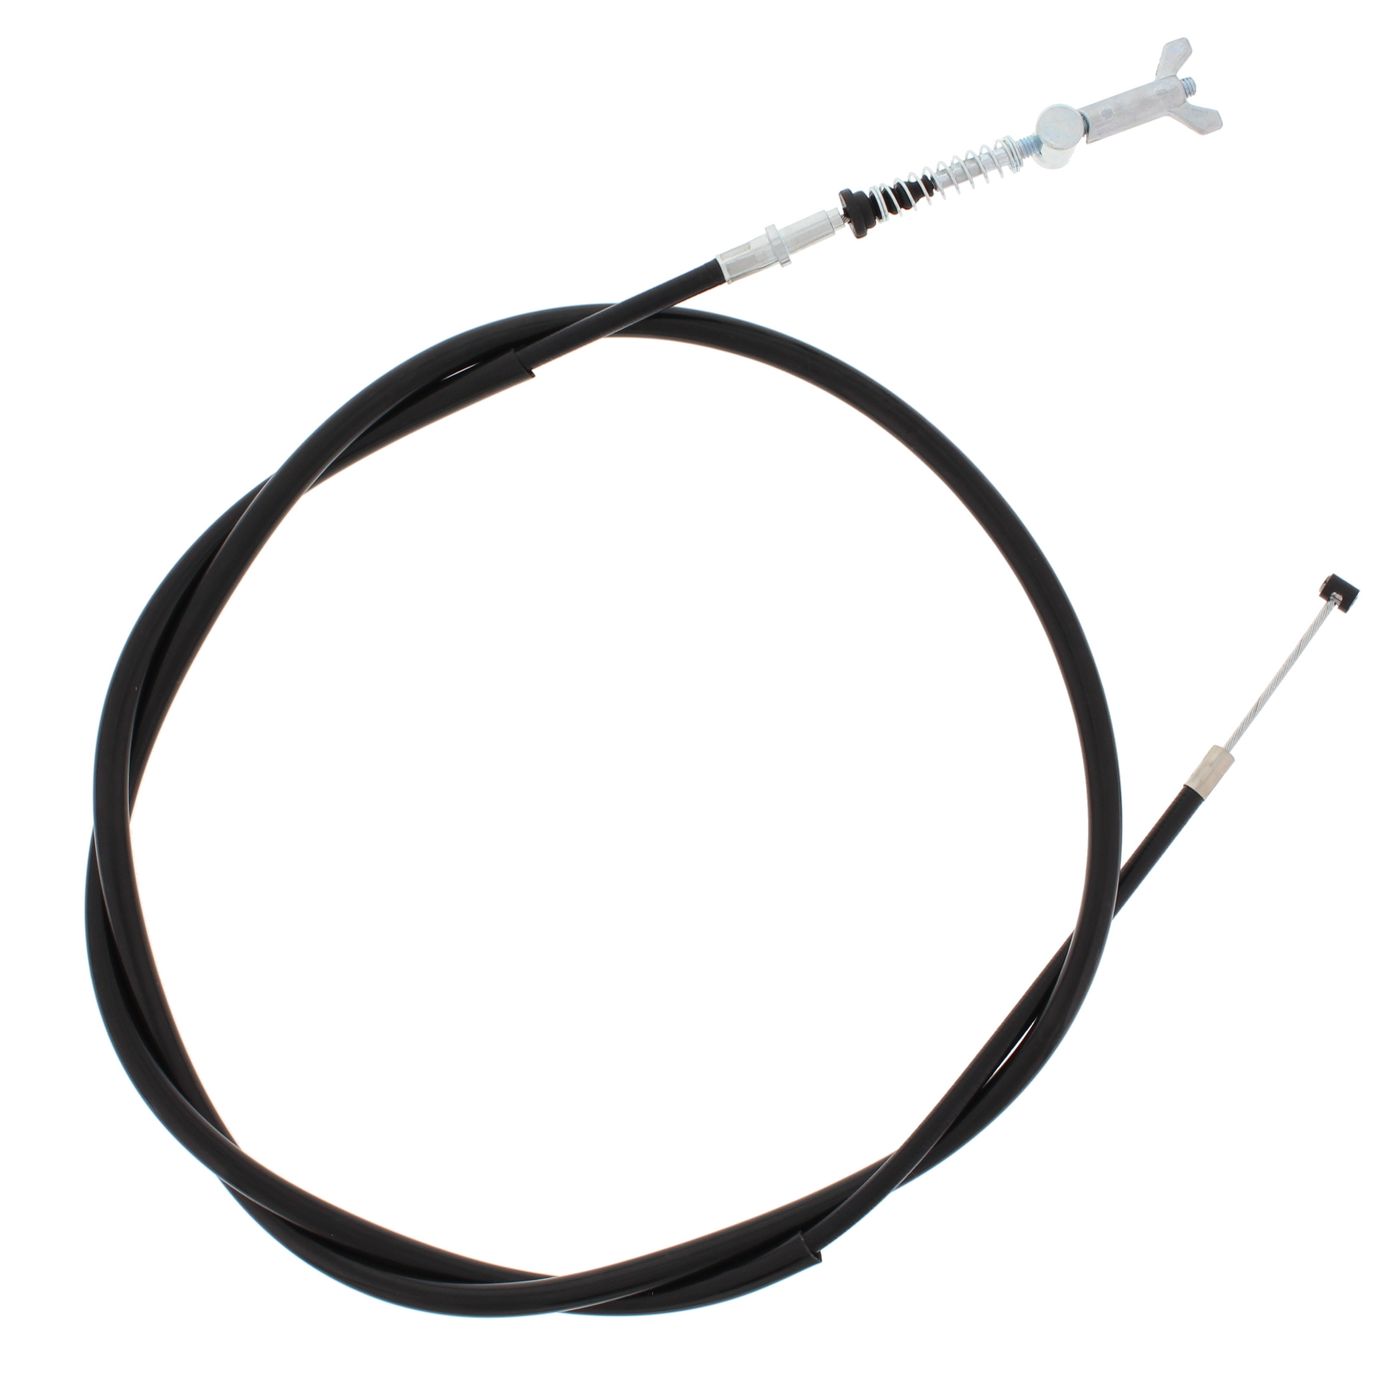 Wrp Brake Cables - WRP454055 image